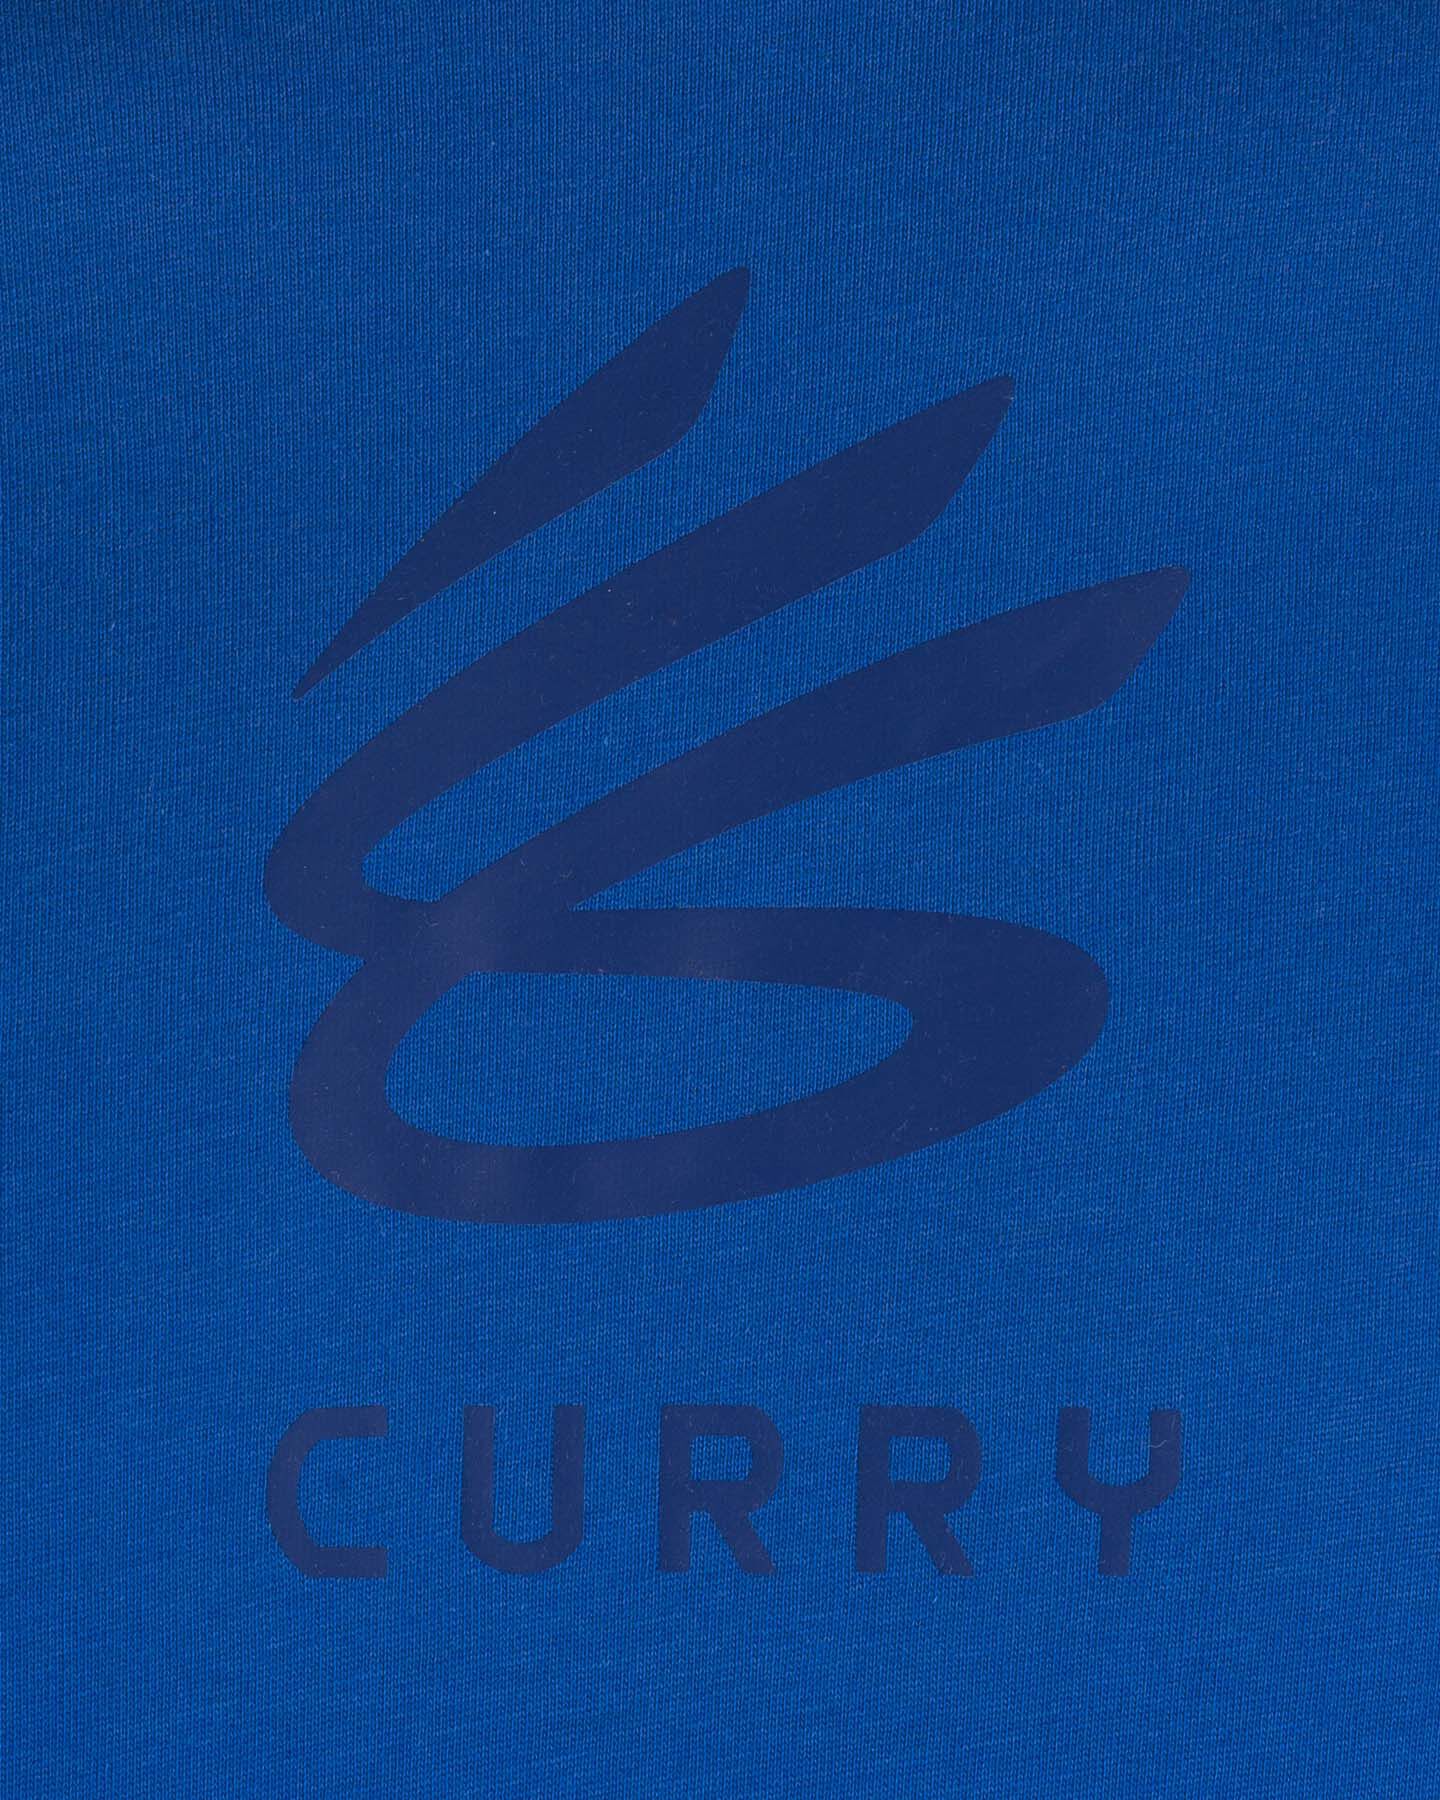  Maglia basket UNDER ARMOUR CURRY LOGO M S5229472 scatto 2